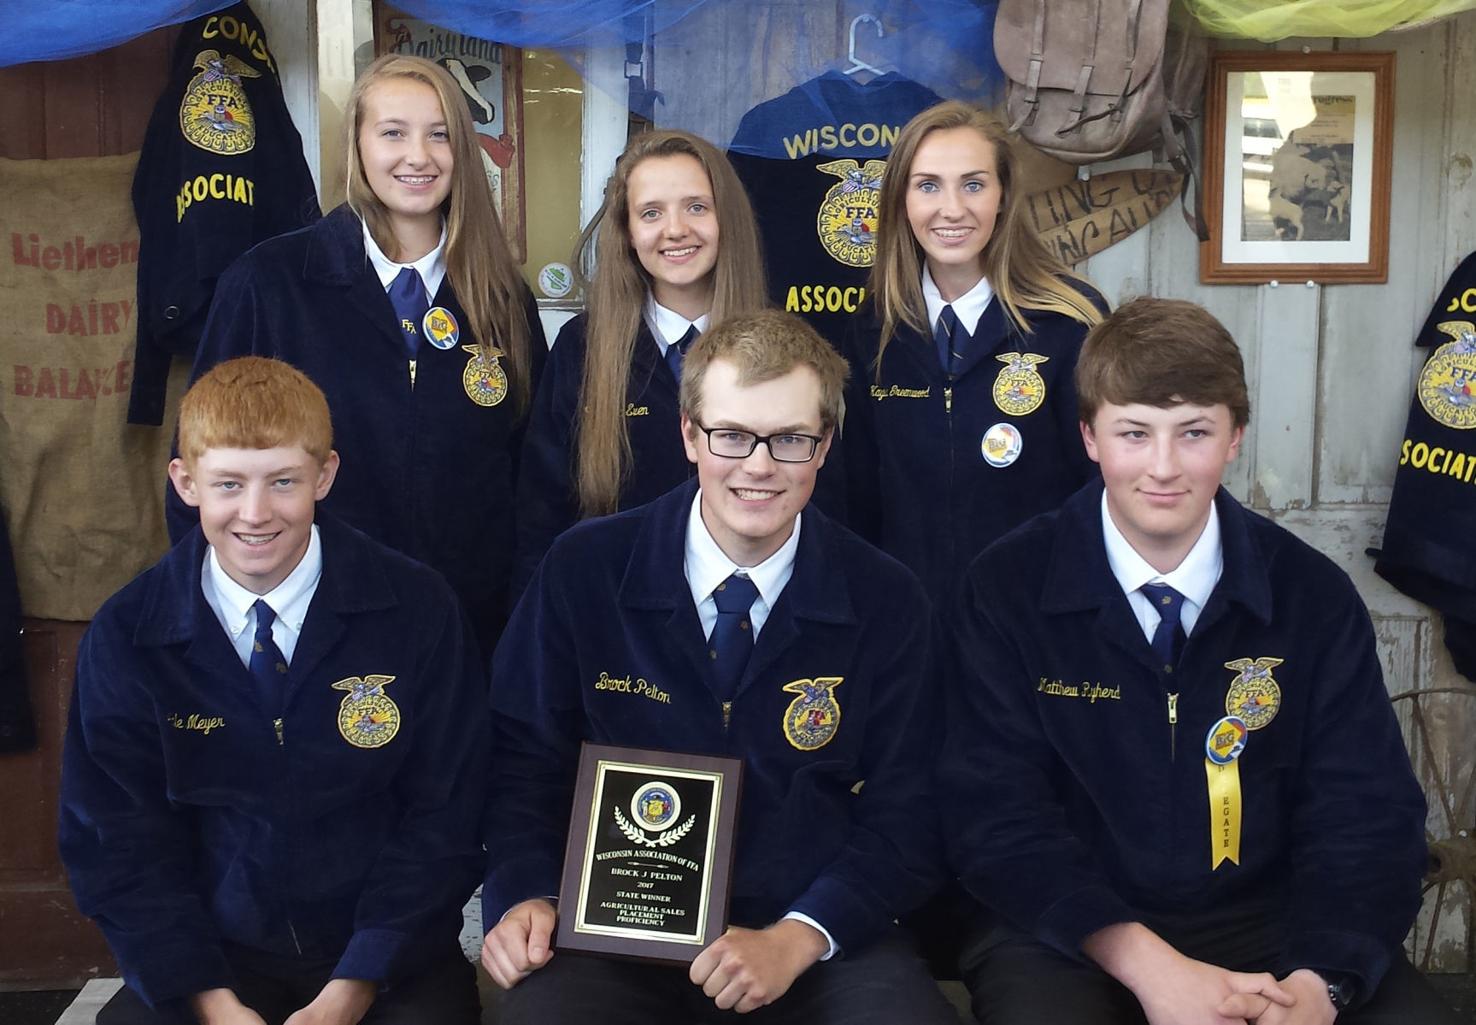 Wisconsin FFA State Convention postponed indefinitely due to COVID19